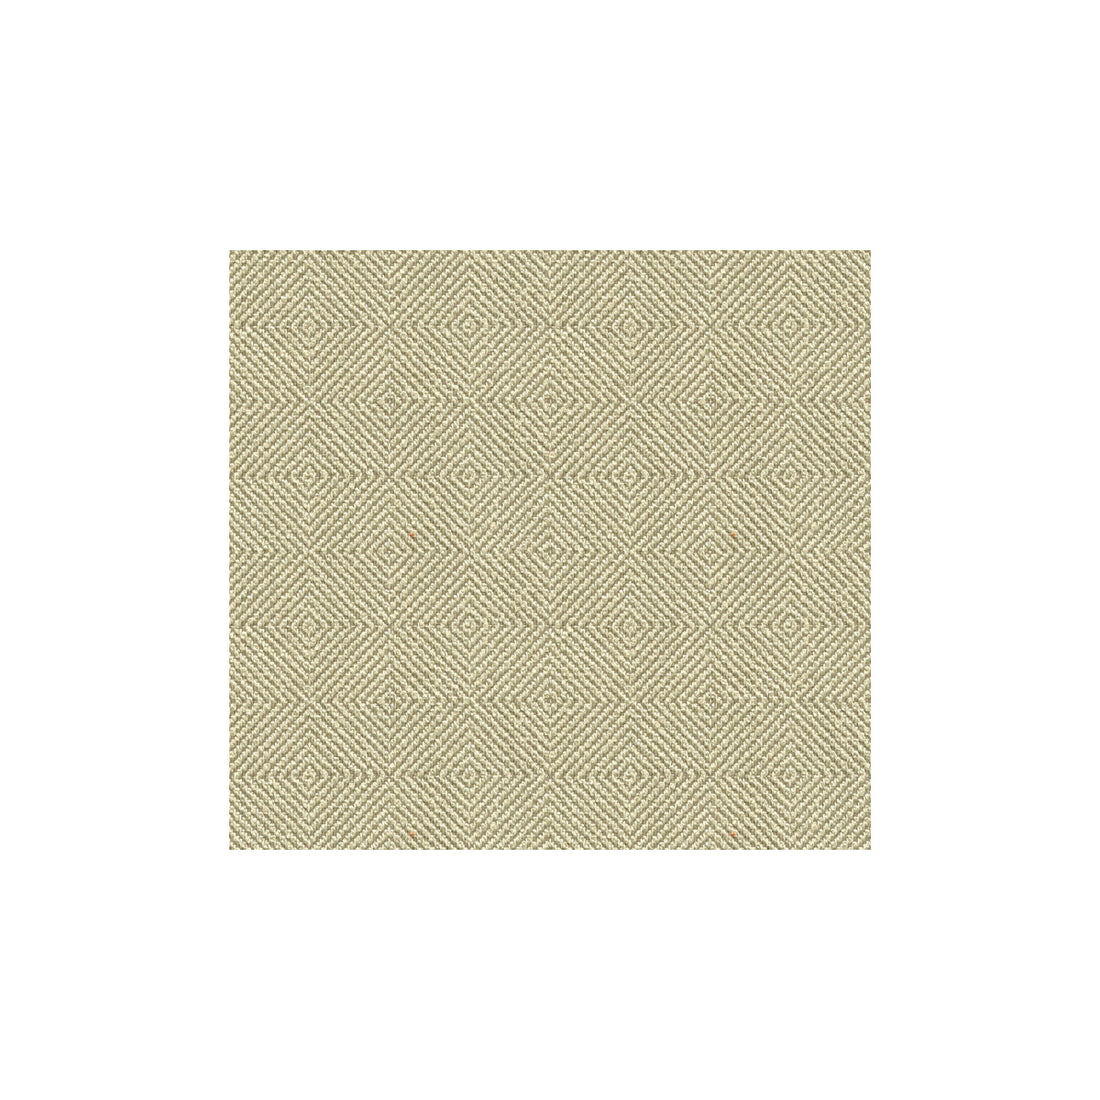 Kravet Smart fabric in 33002-16 color - pattern 33002.16.0 - by Kravet Smart in the Gis collection